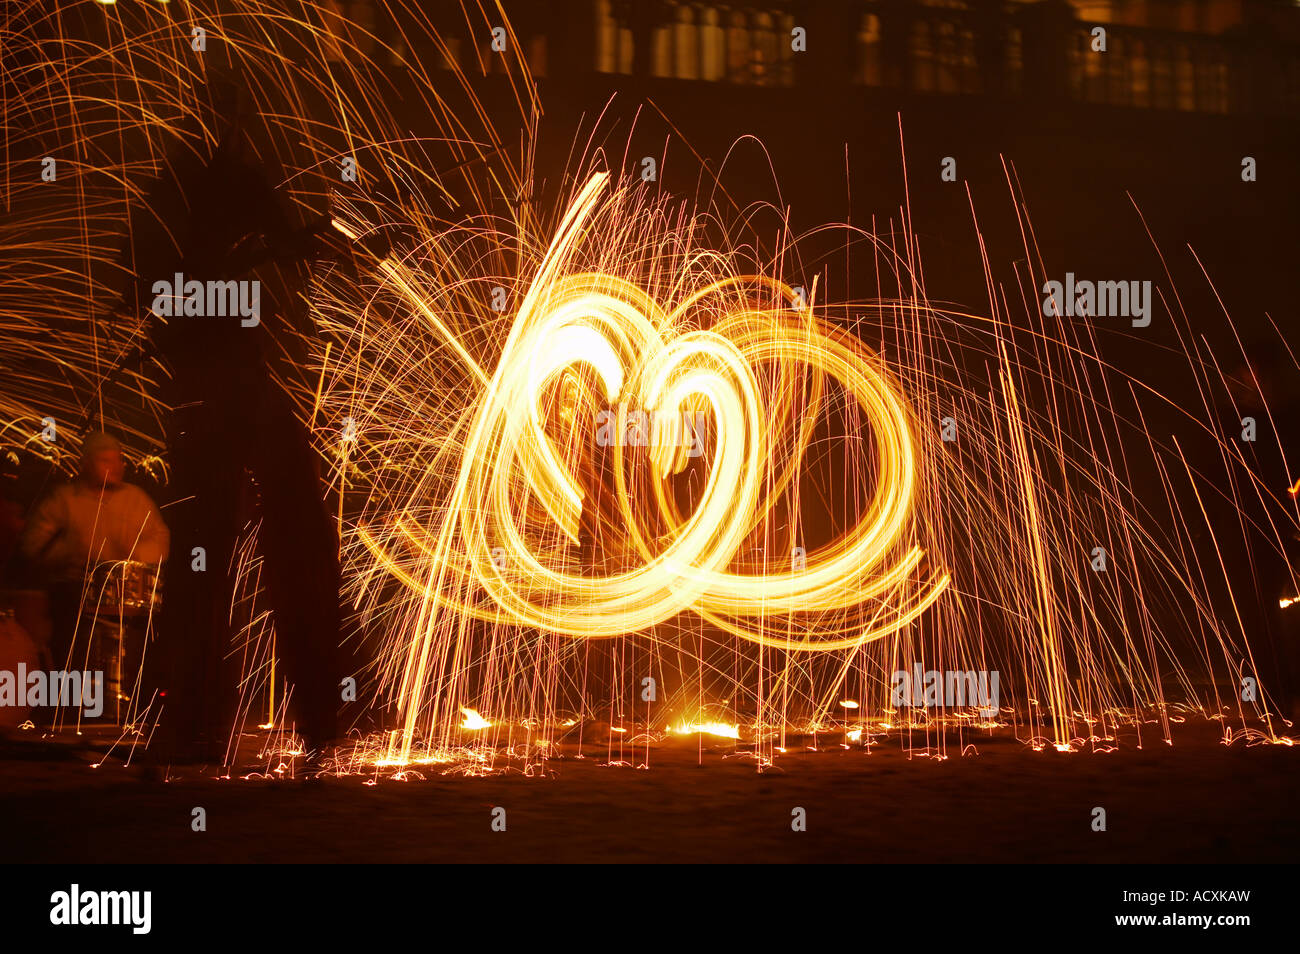 Burning steel wool spinning by Fire Folk at The Forces of Light festival, Helsinki, Finland Stock Photo